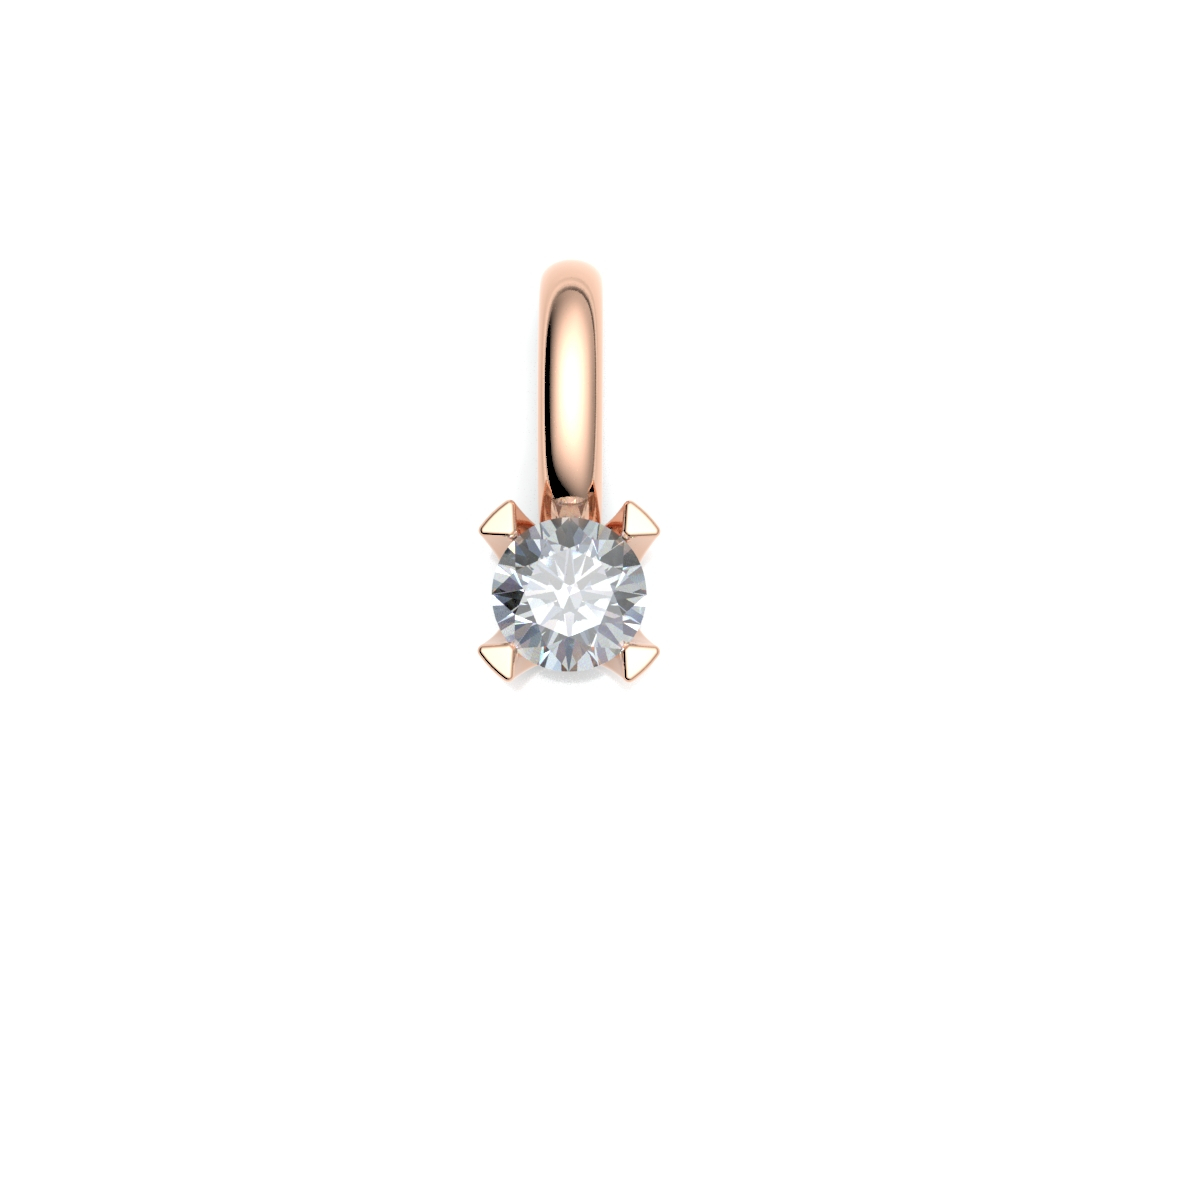 212798-4034-001 | Anhänger Landshut 212798 375 Rotgold Brillant 0,150 ct H-SI ∅ 3.4mm100% Made in Germany  